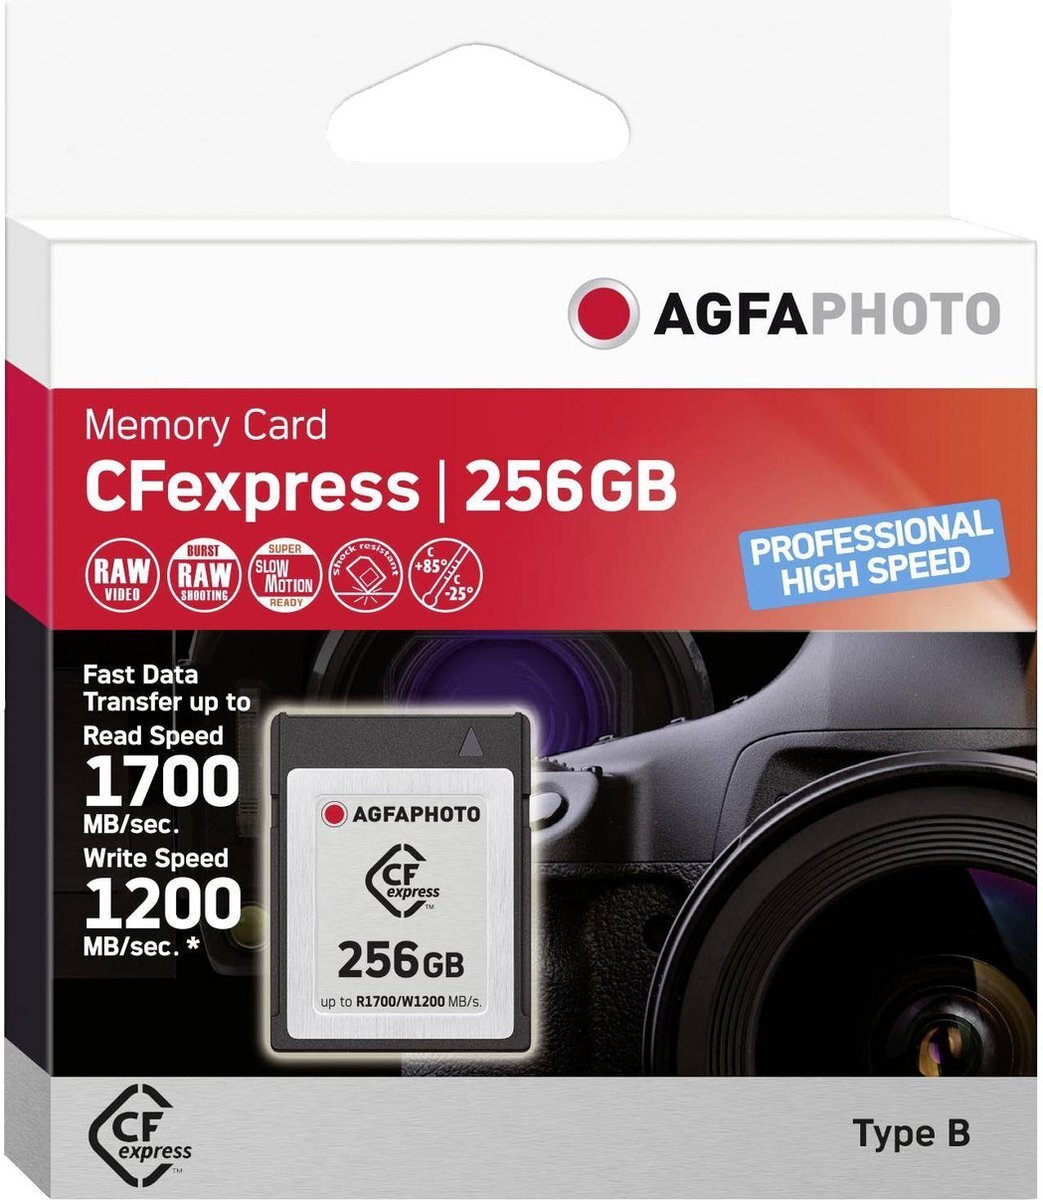 Agfa CFexpress 256GB Professional High Speed